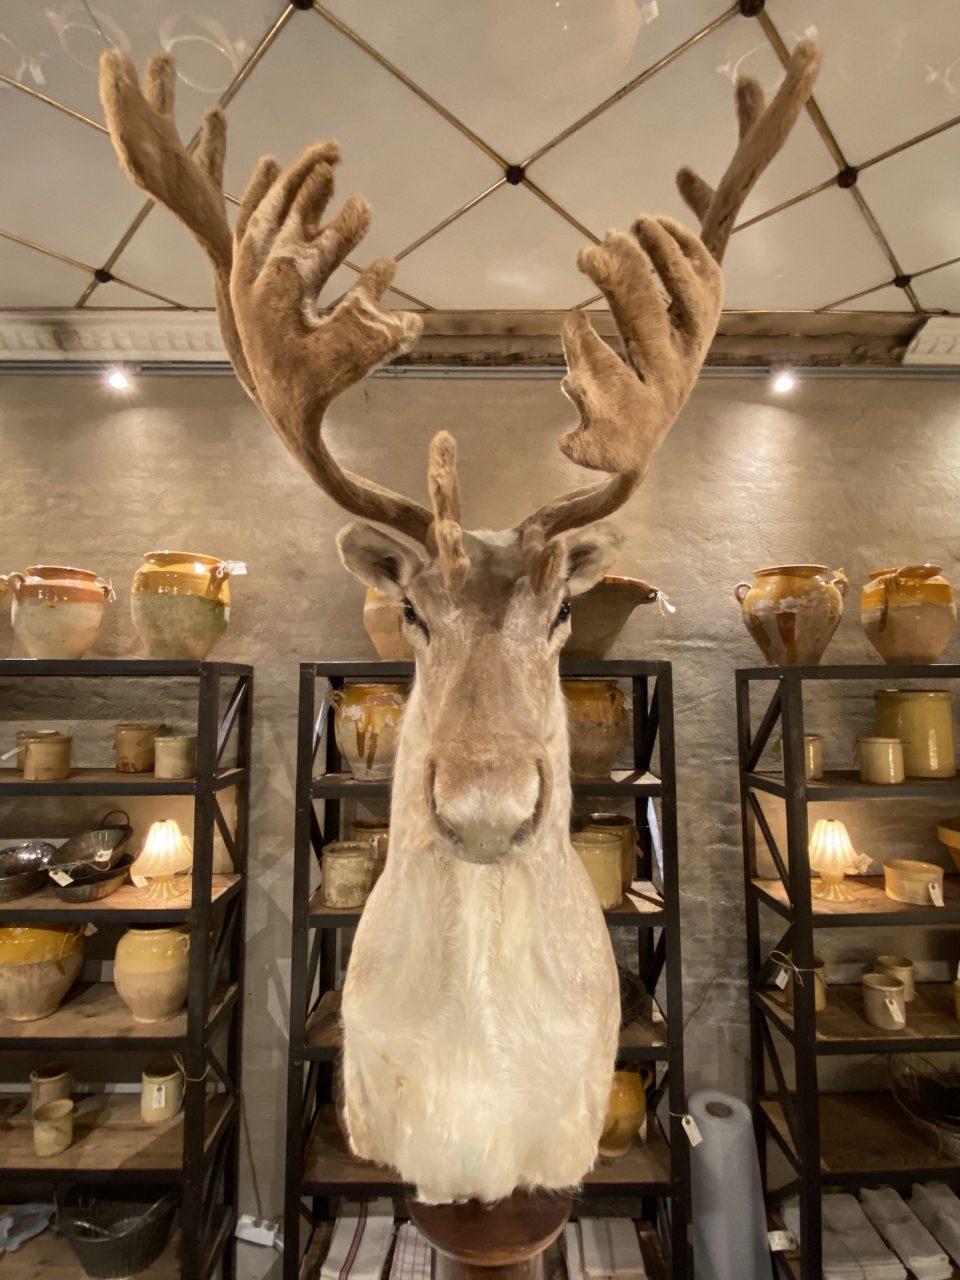 Charming eye-catching and beautiful vintage stuffed reindeer head with large antlers. A true Rudolph! Originally from northern Alaska, but purchased in France and belongs to the species of reindeer called Alaskakaribu.

The reindeer has an